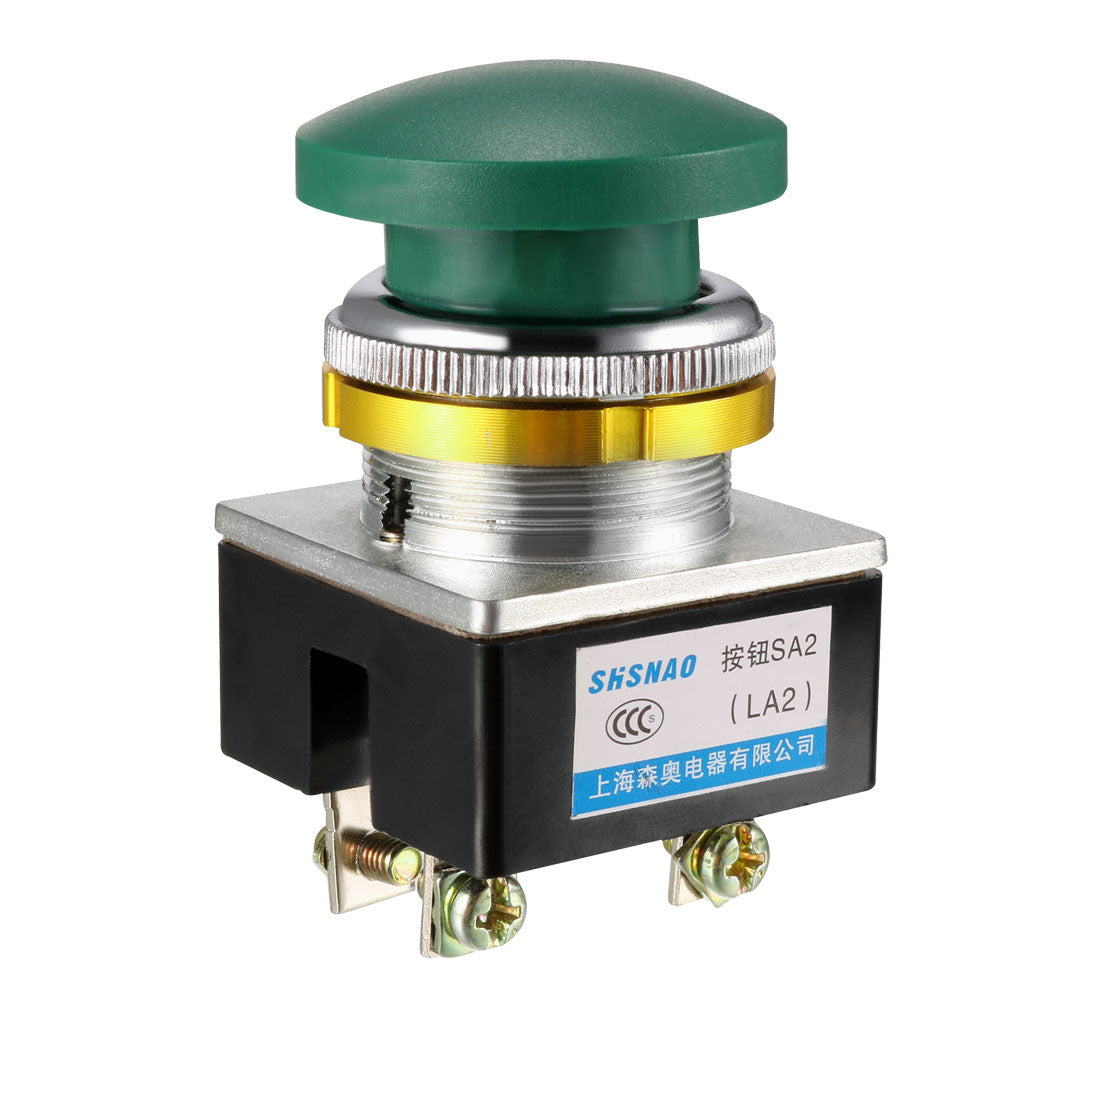 uxcell Uxcell Push Bottom Switch Green Momentary AC 380V 5A Mushroom Head Pushbutton Switches 30mm Panel Mount